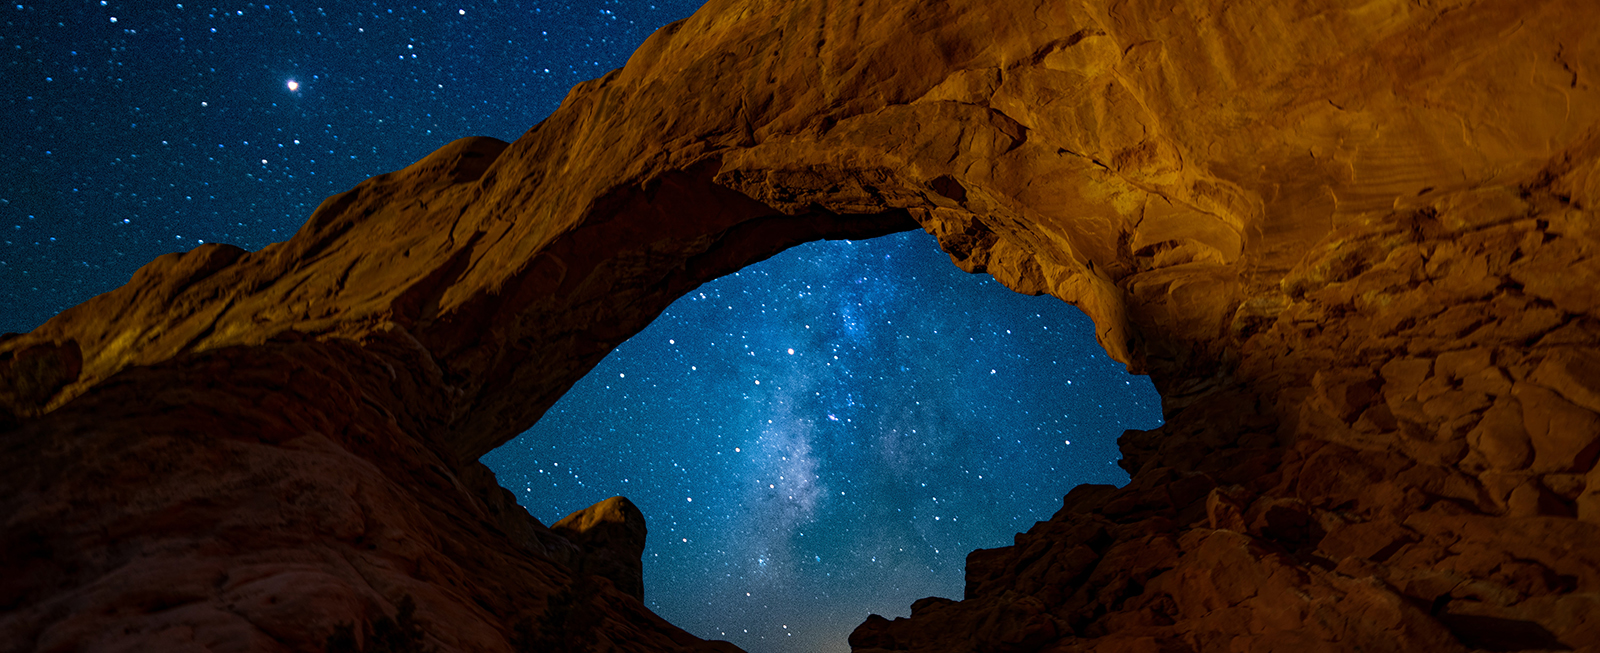 Starry night sky at Arches National Park